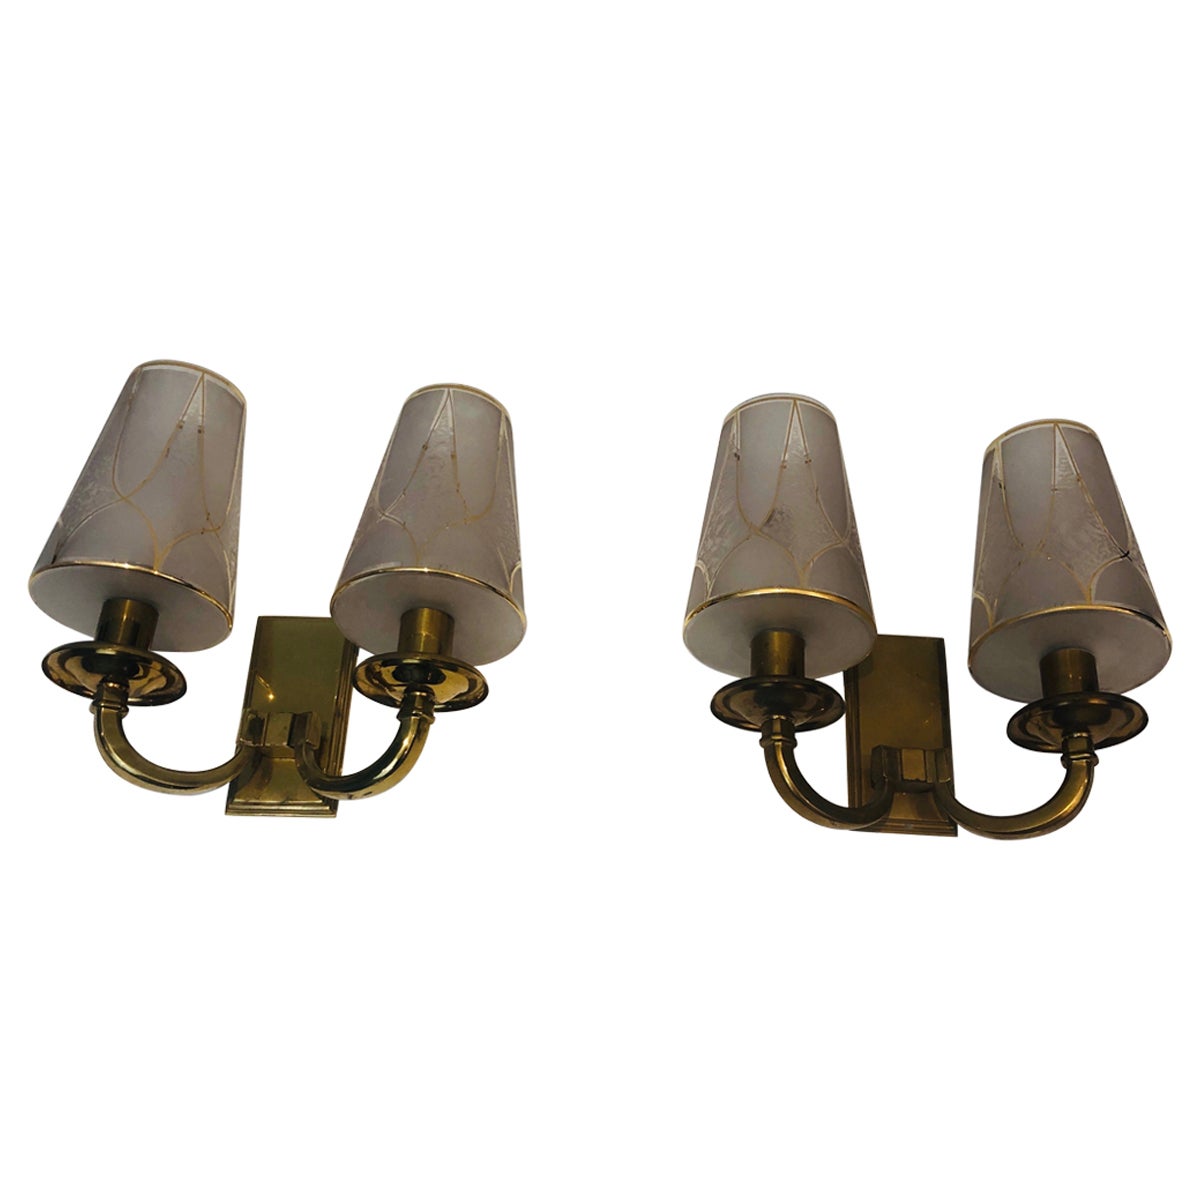 Pair of Art Deco Brass Wall Lights, French Work in the Style of Perzel, 1900's For Sale